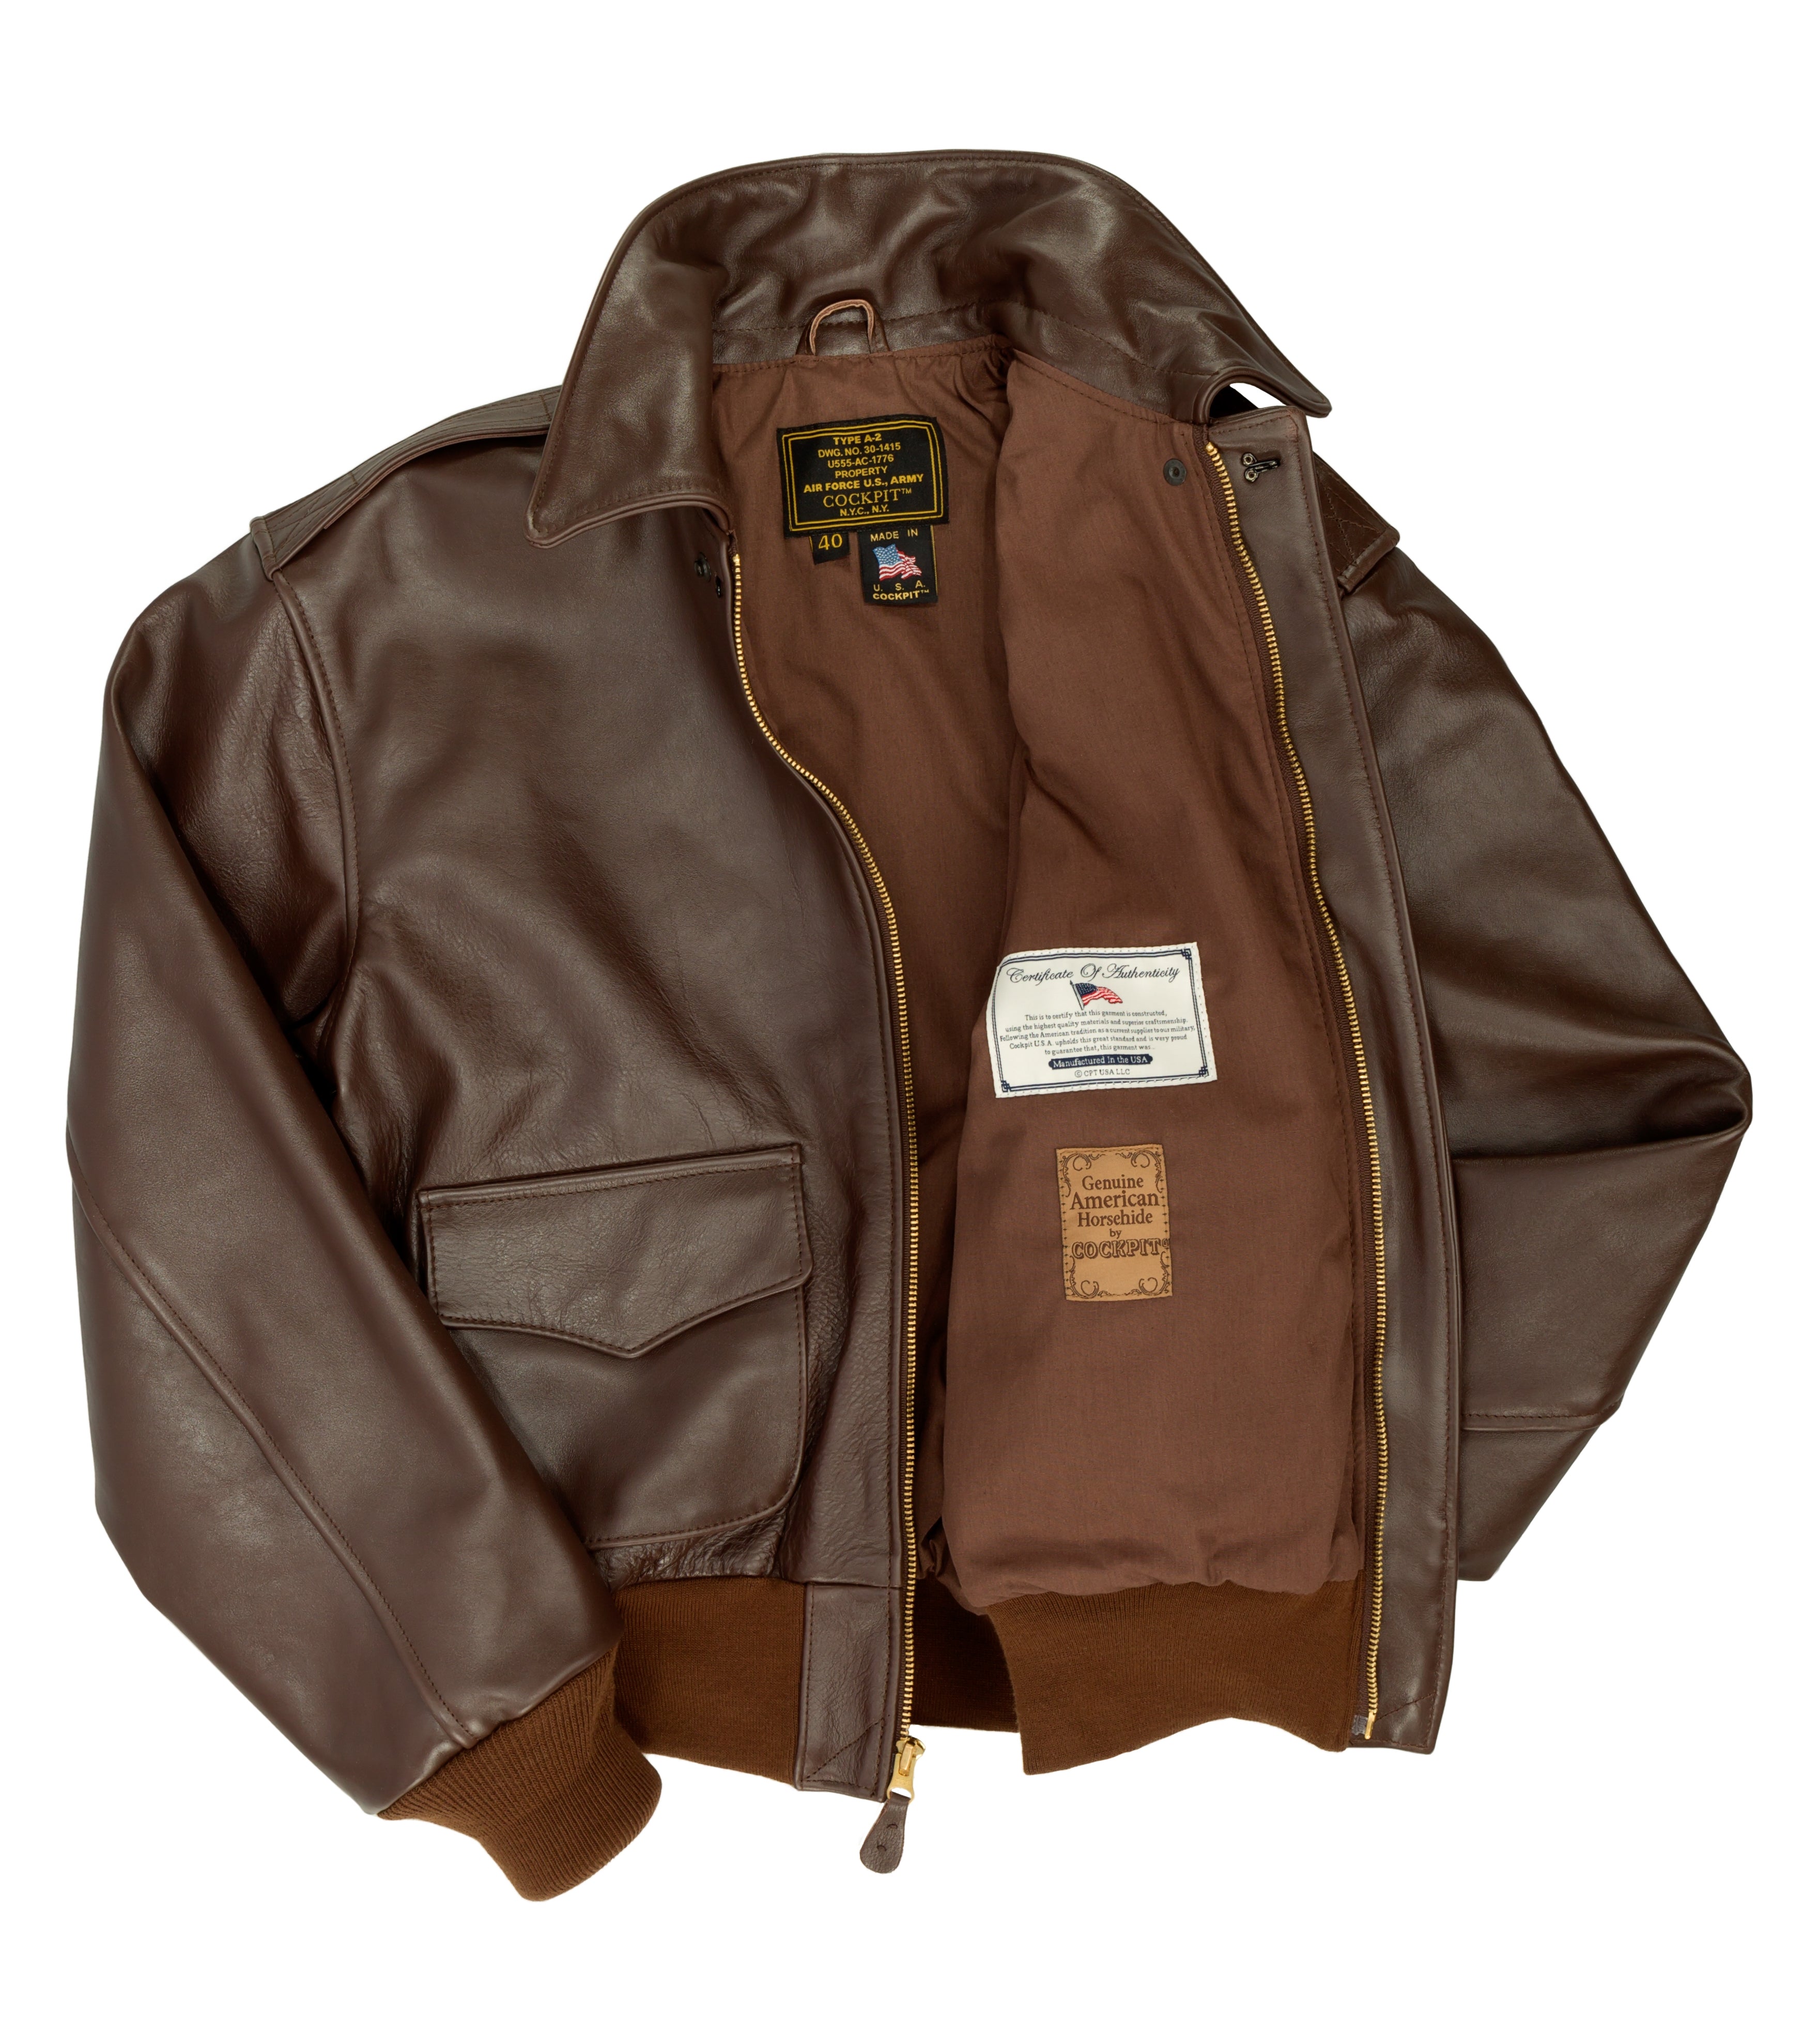 Tall Men's Leather Jacket | Government Jacket | Cockpit USA